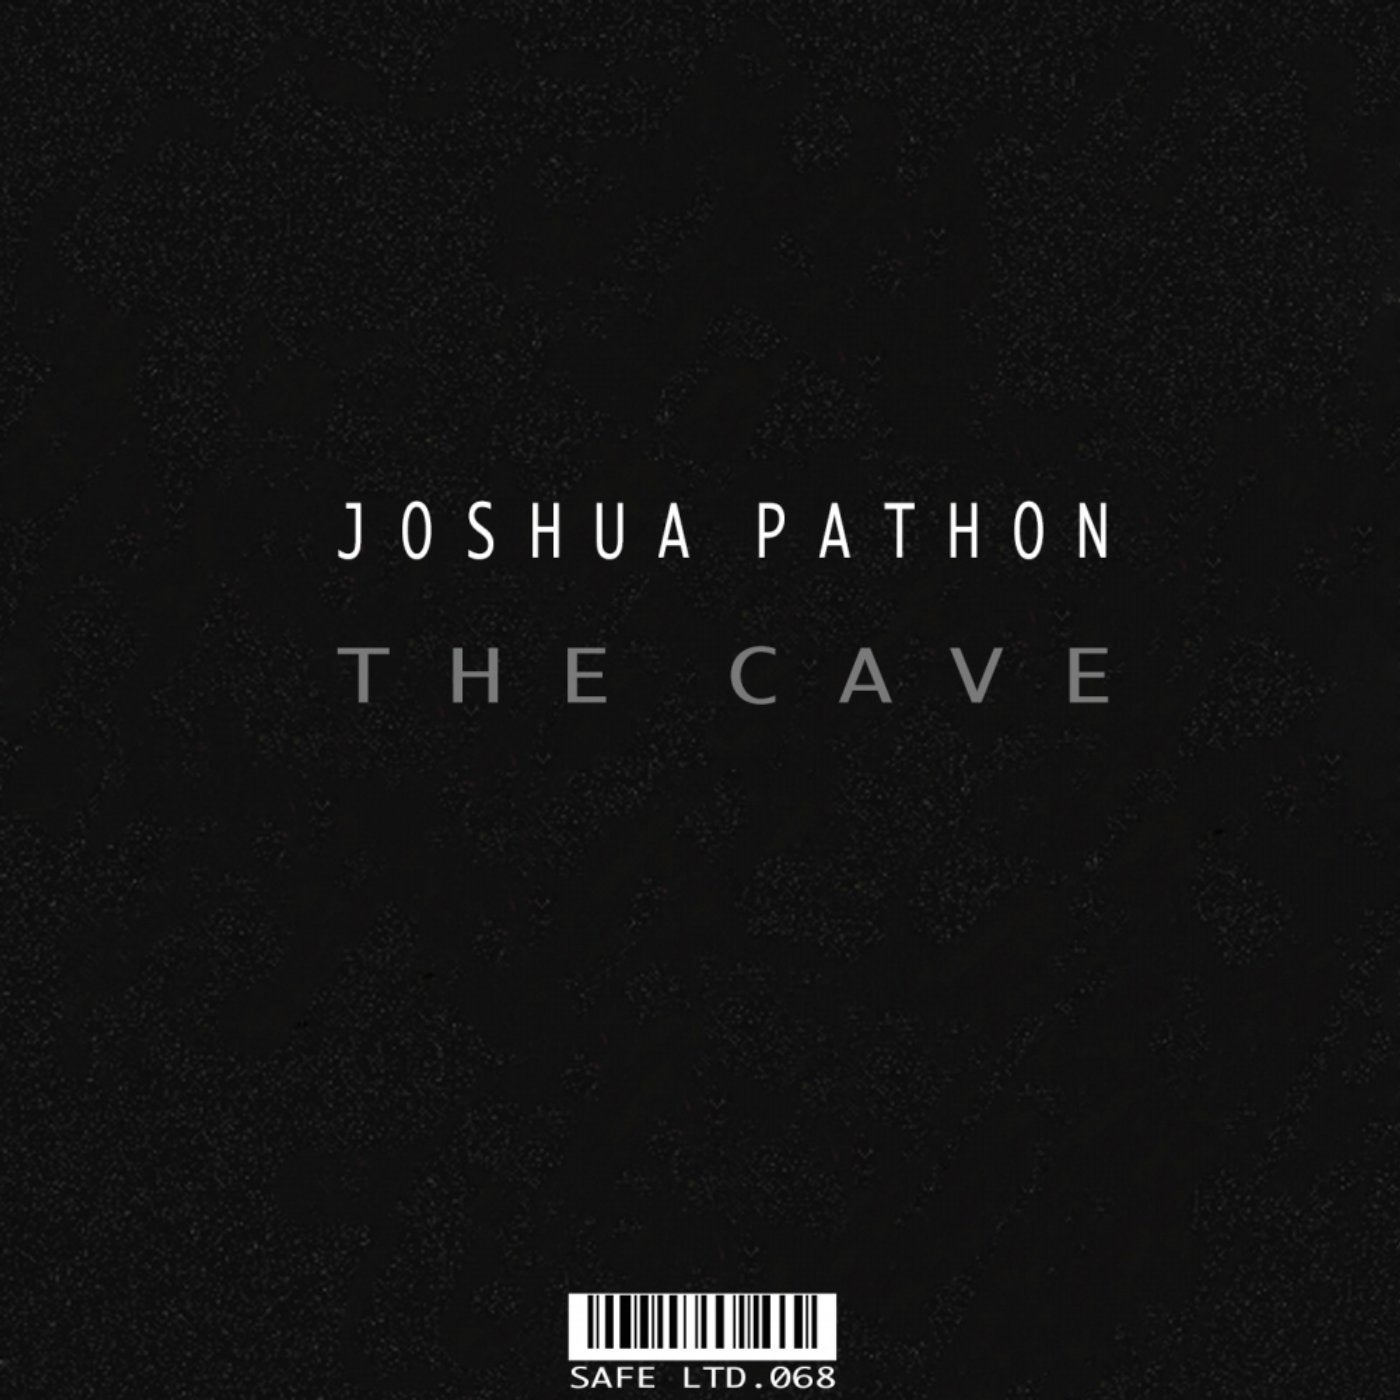 The Cave EP